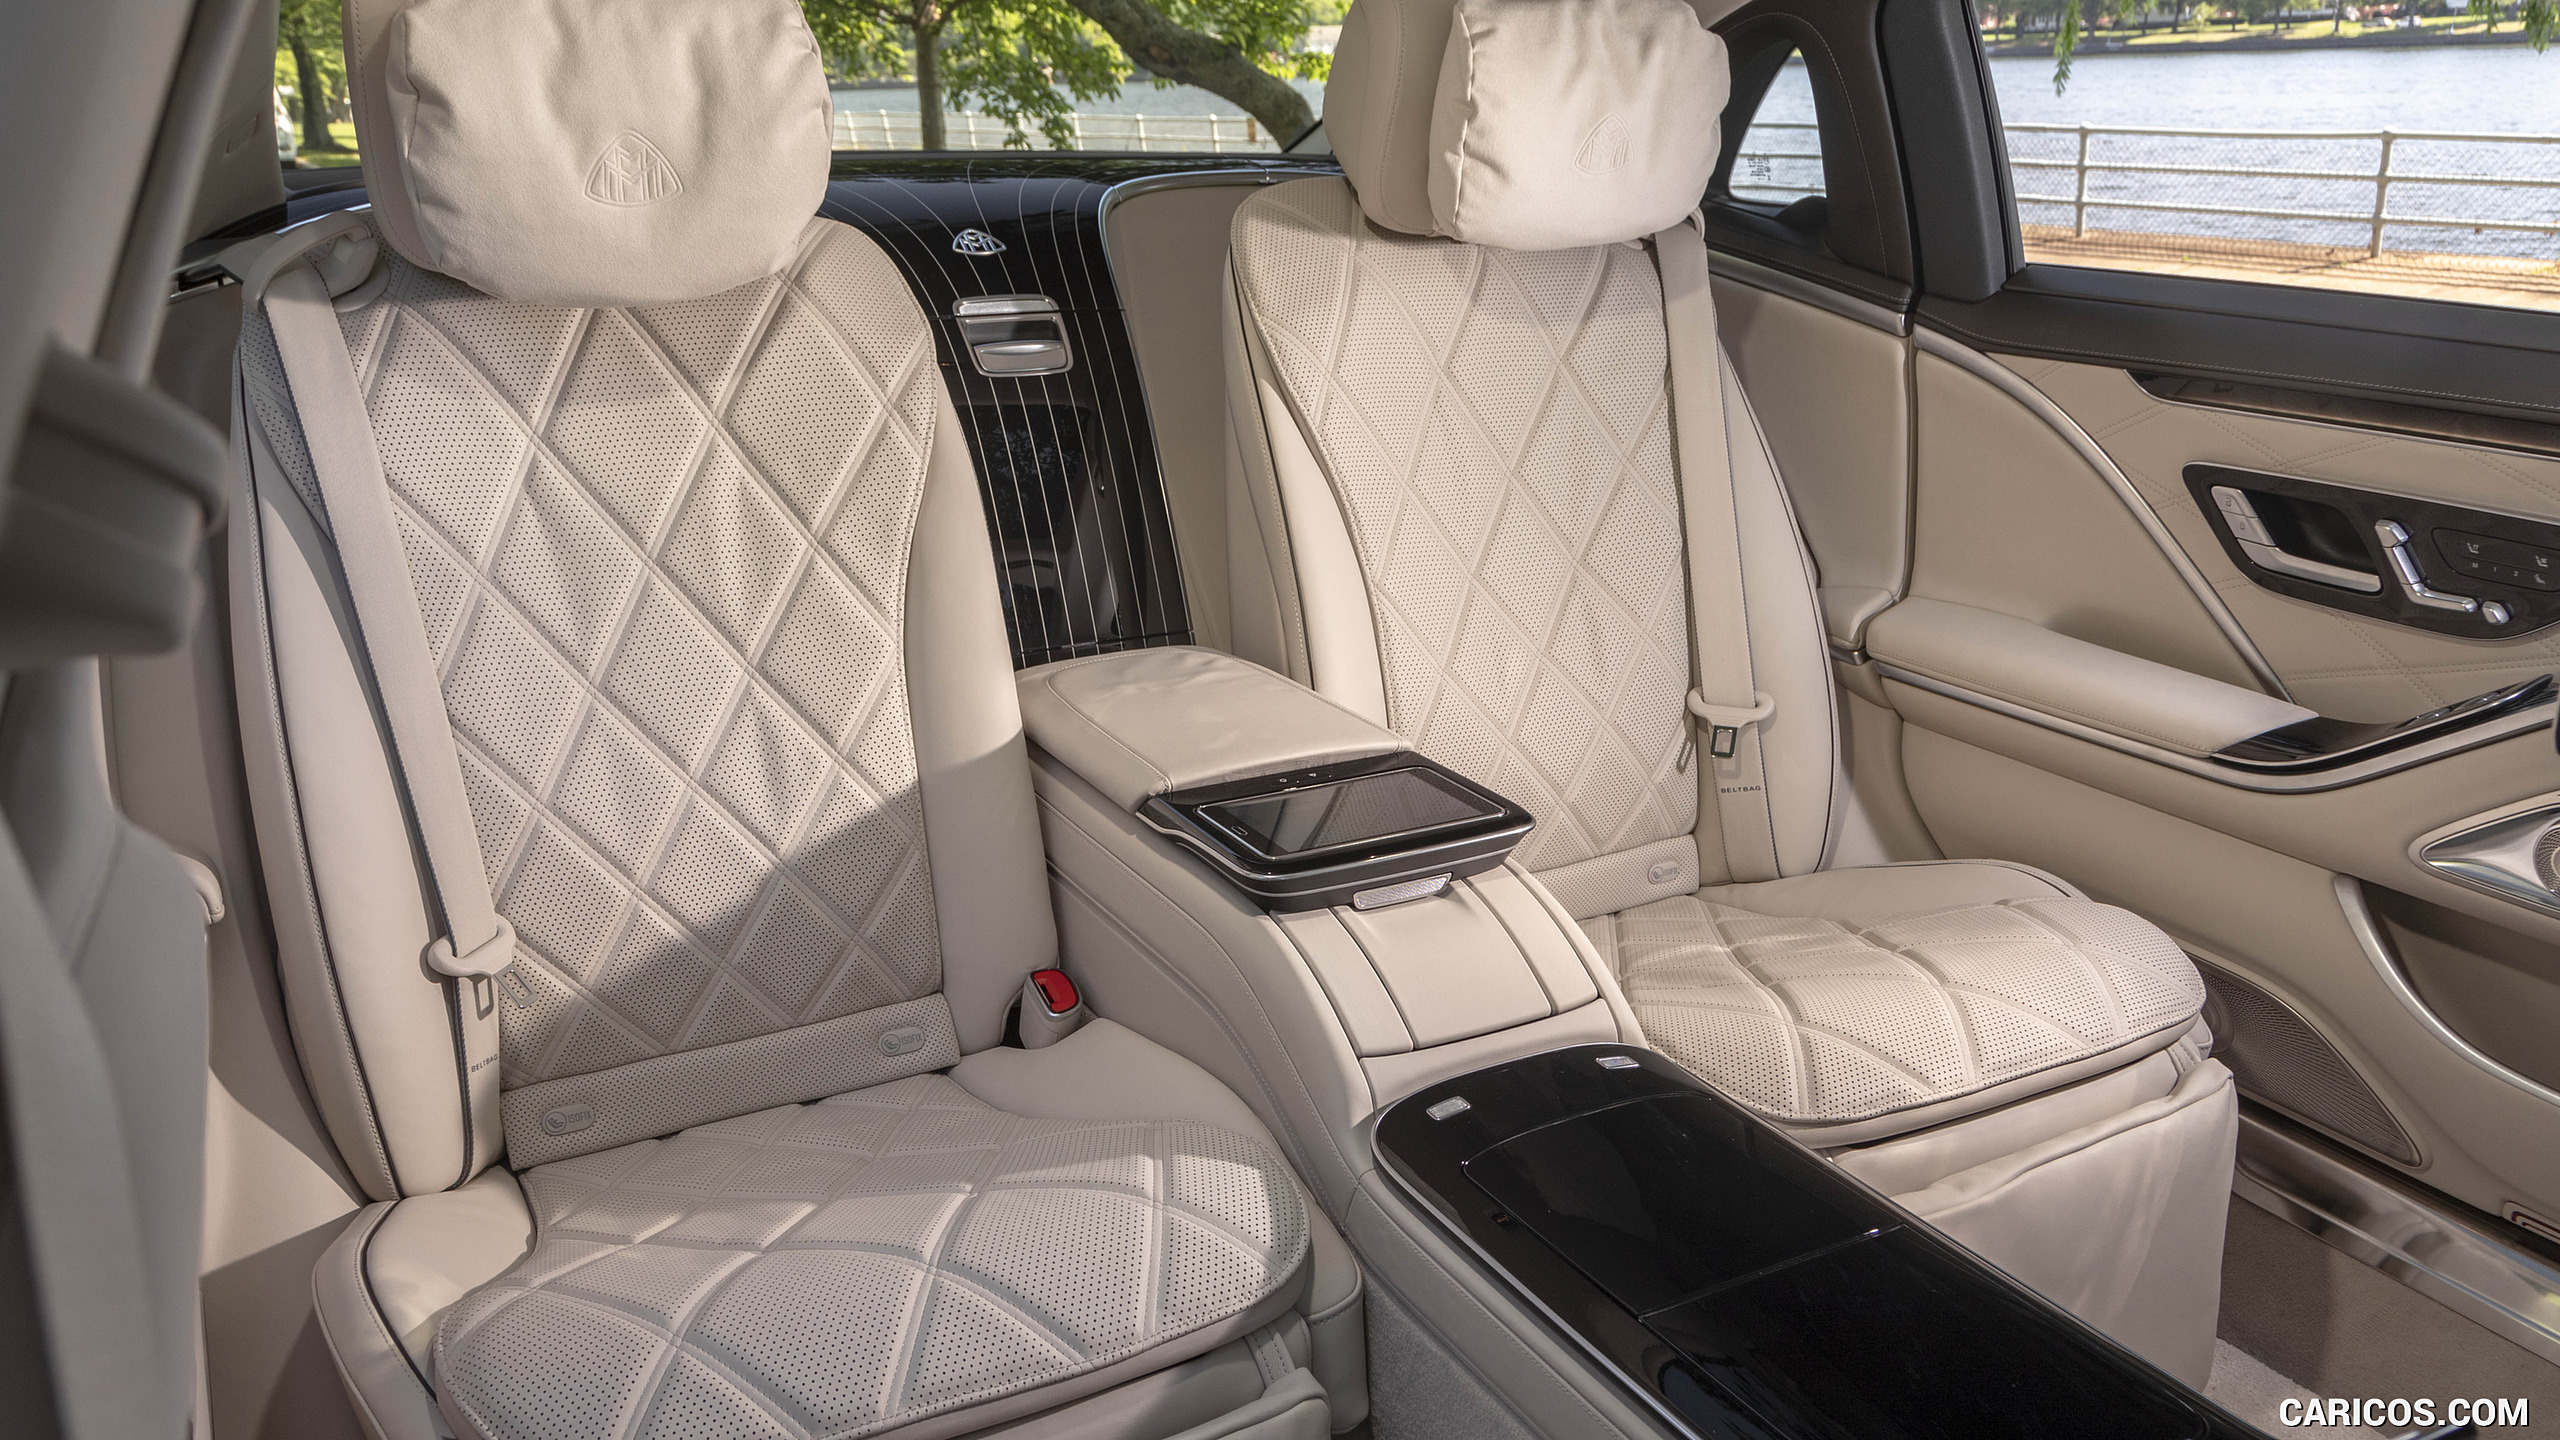 2022 Mercedes-Maybach S 680 4MATIC (US-Spec) - Interior, Rear Seats, #83 of 173